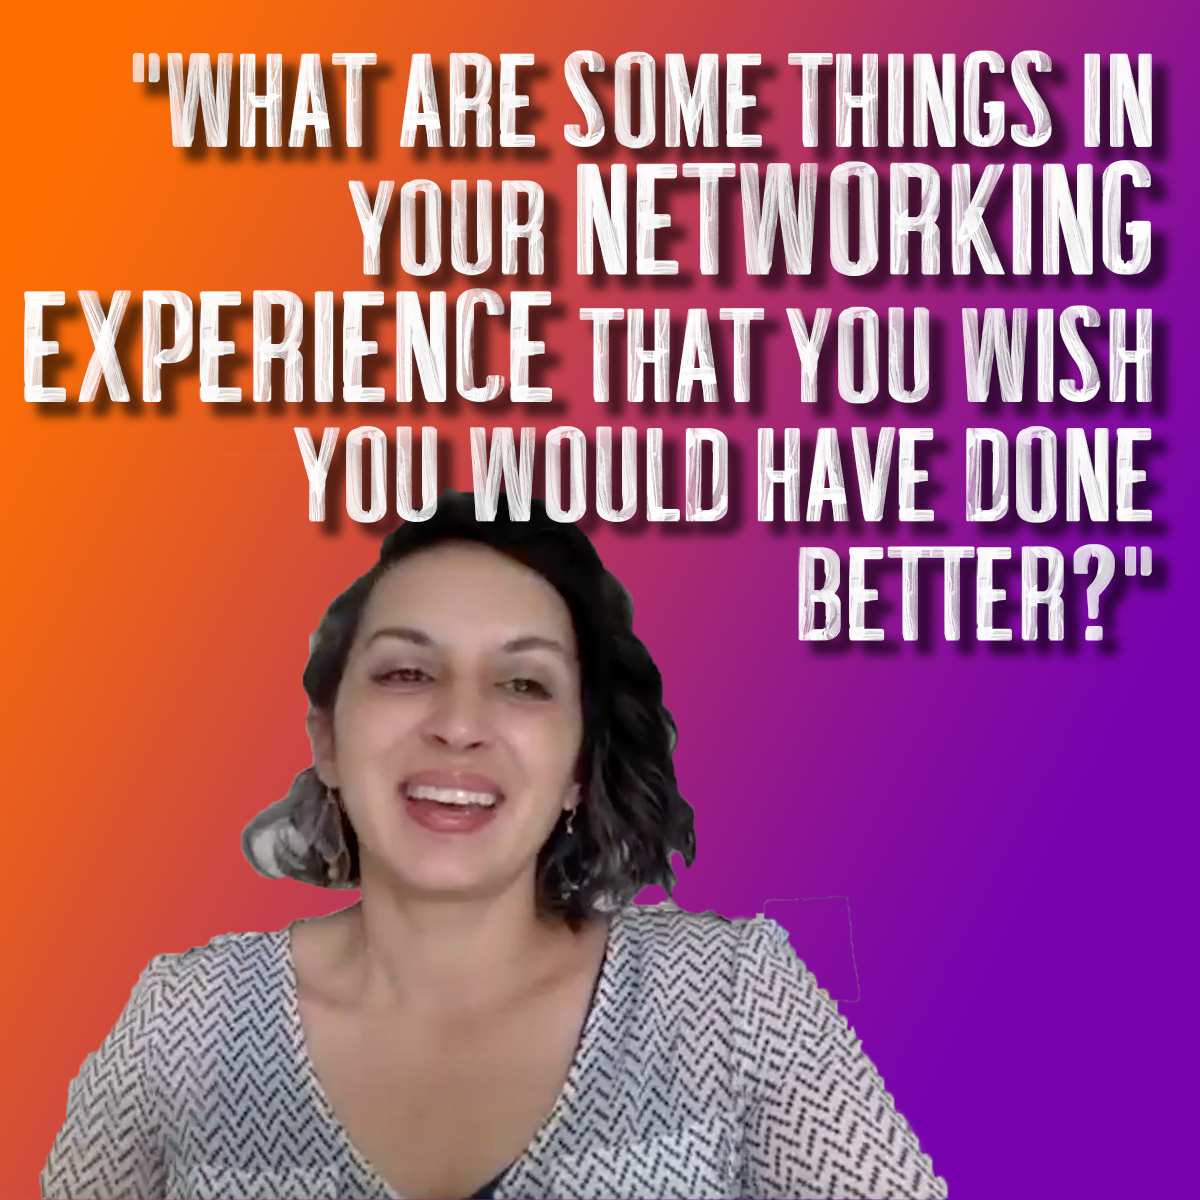 What Are Some Things in Your Networking Experience You Wish Had Gone Better?